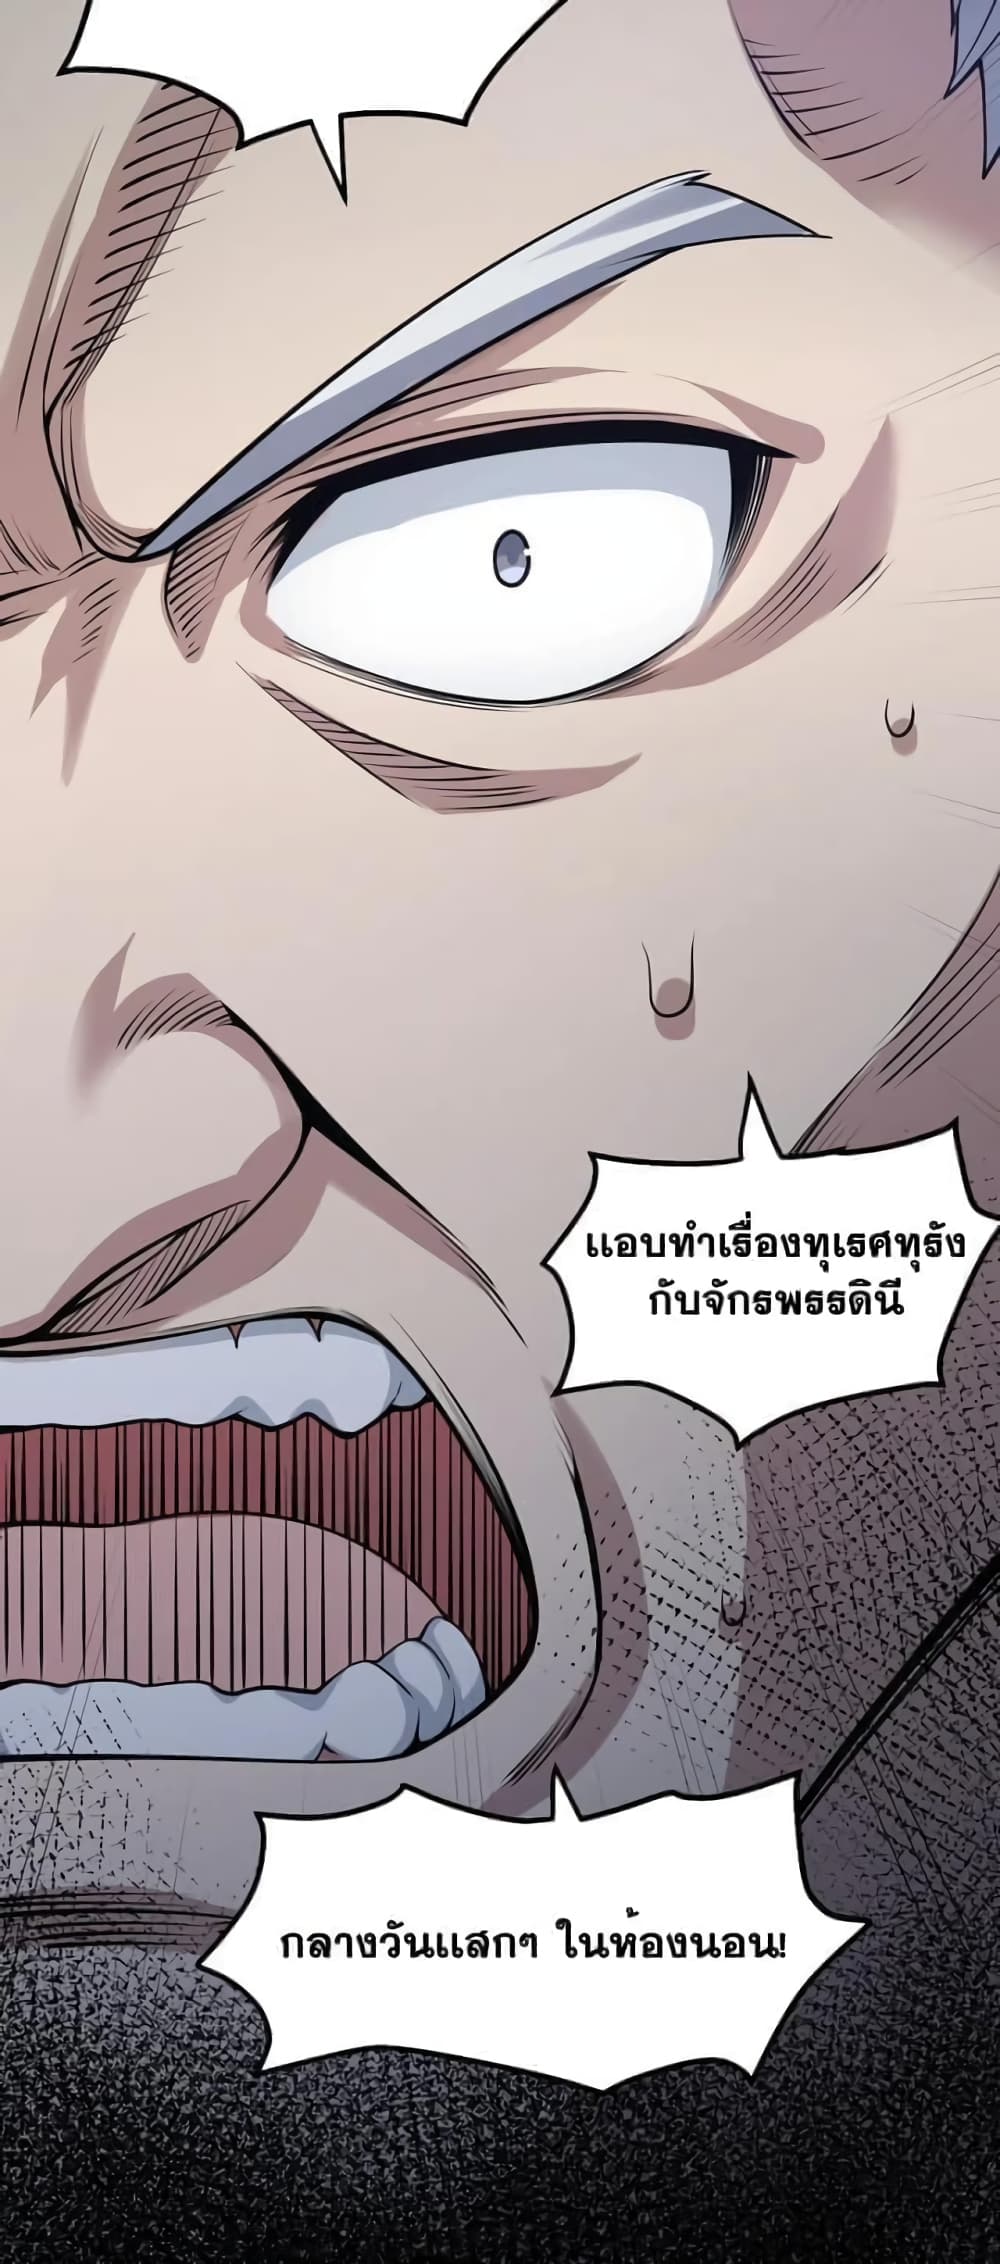 Godsian Masian from Another World ตอนที่ 124 (9)